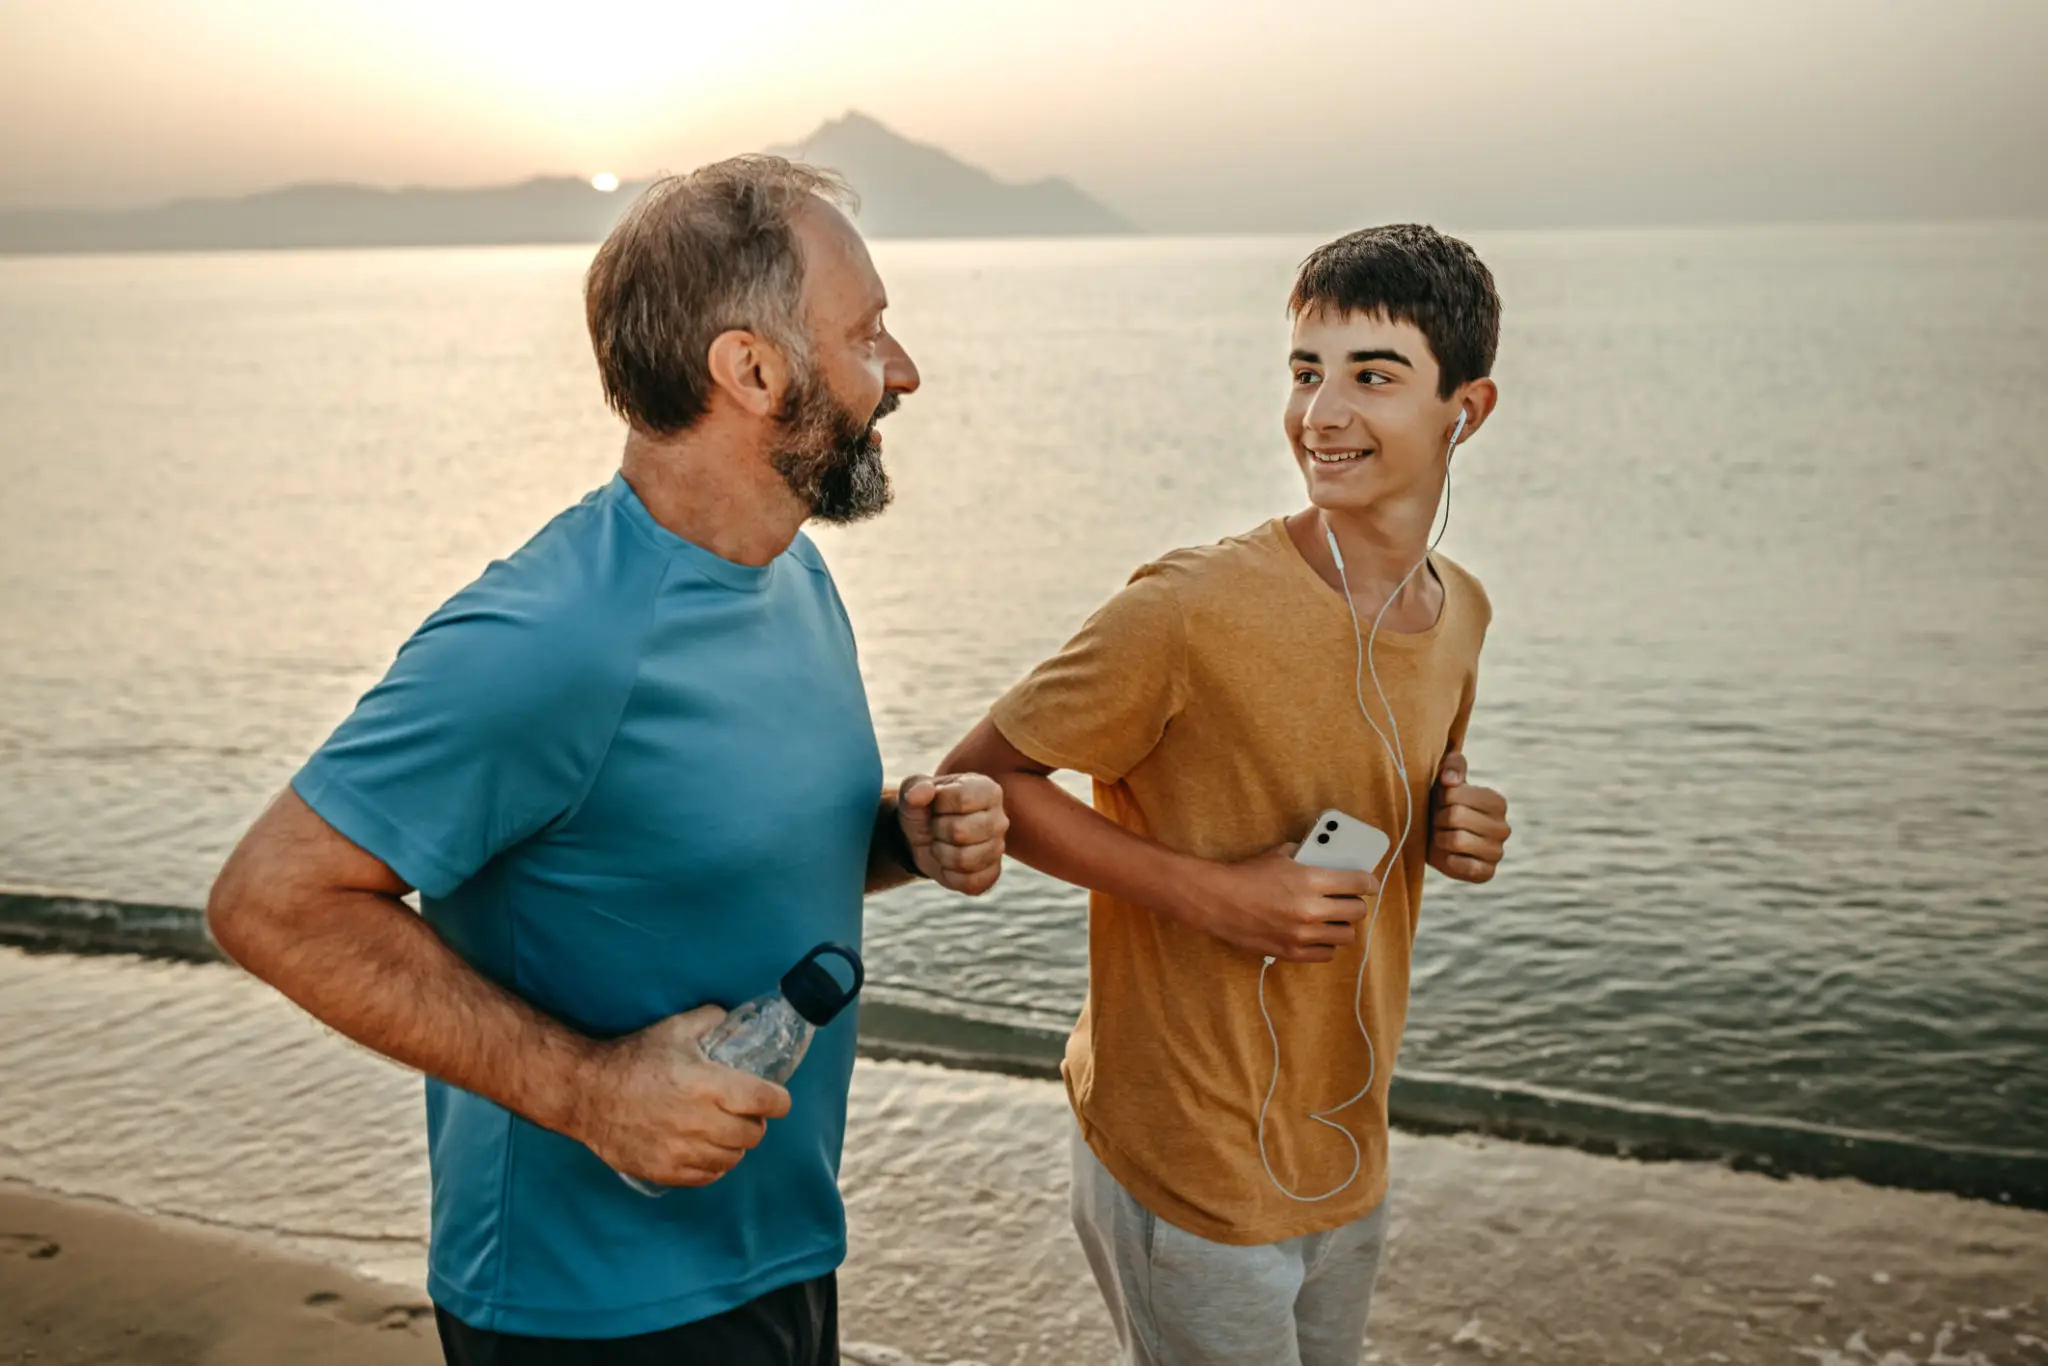 Smiling father and son jogging at beach during sunset